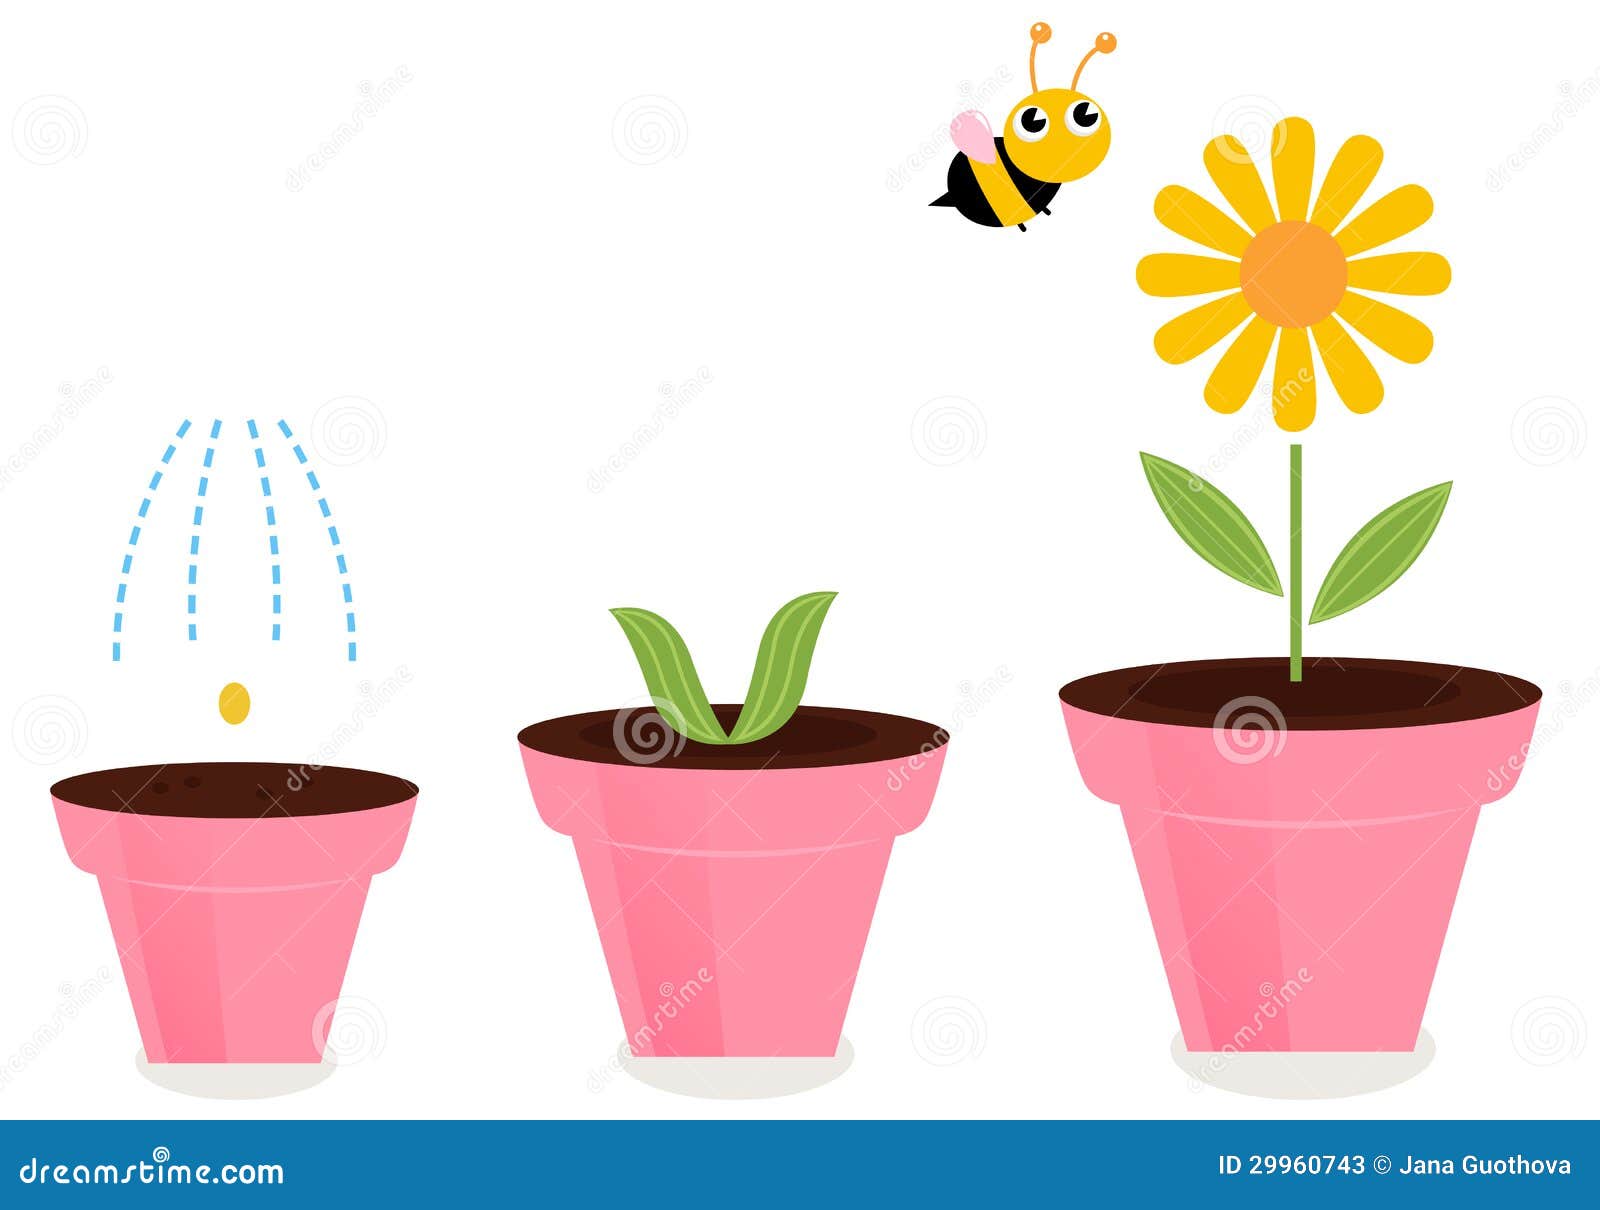 Stock Photos: Flower in pots growth stages isolated on white. Image 